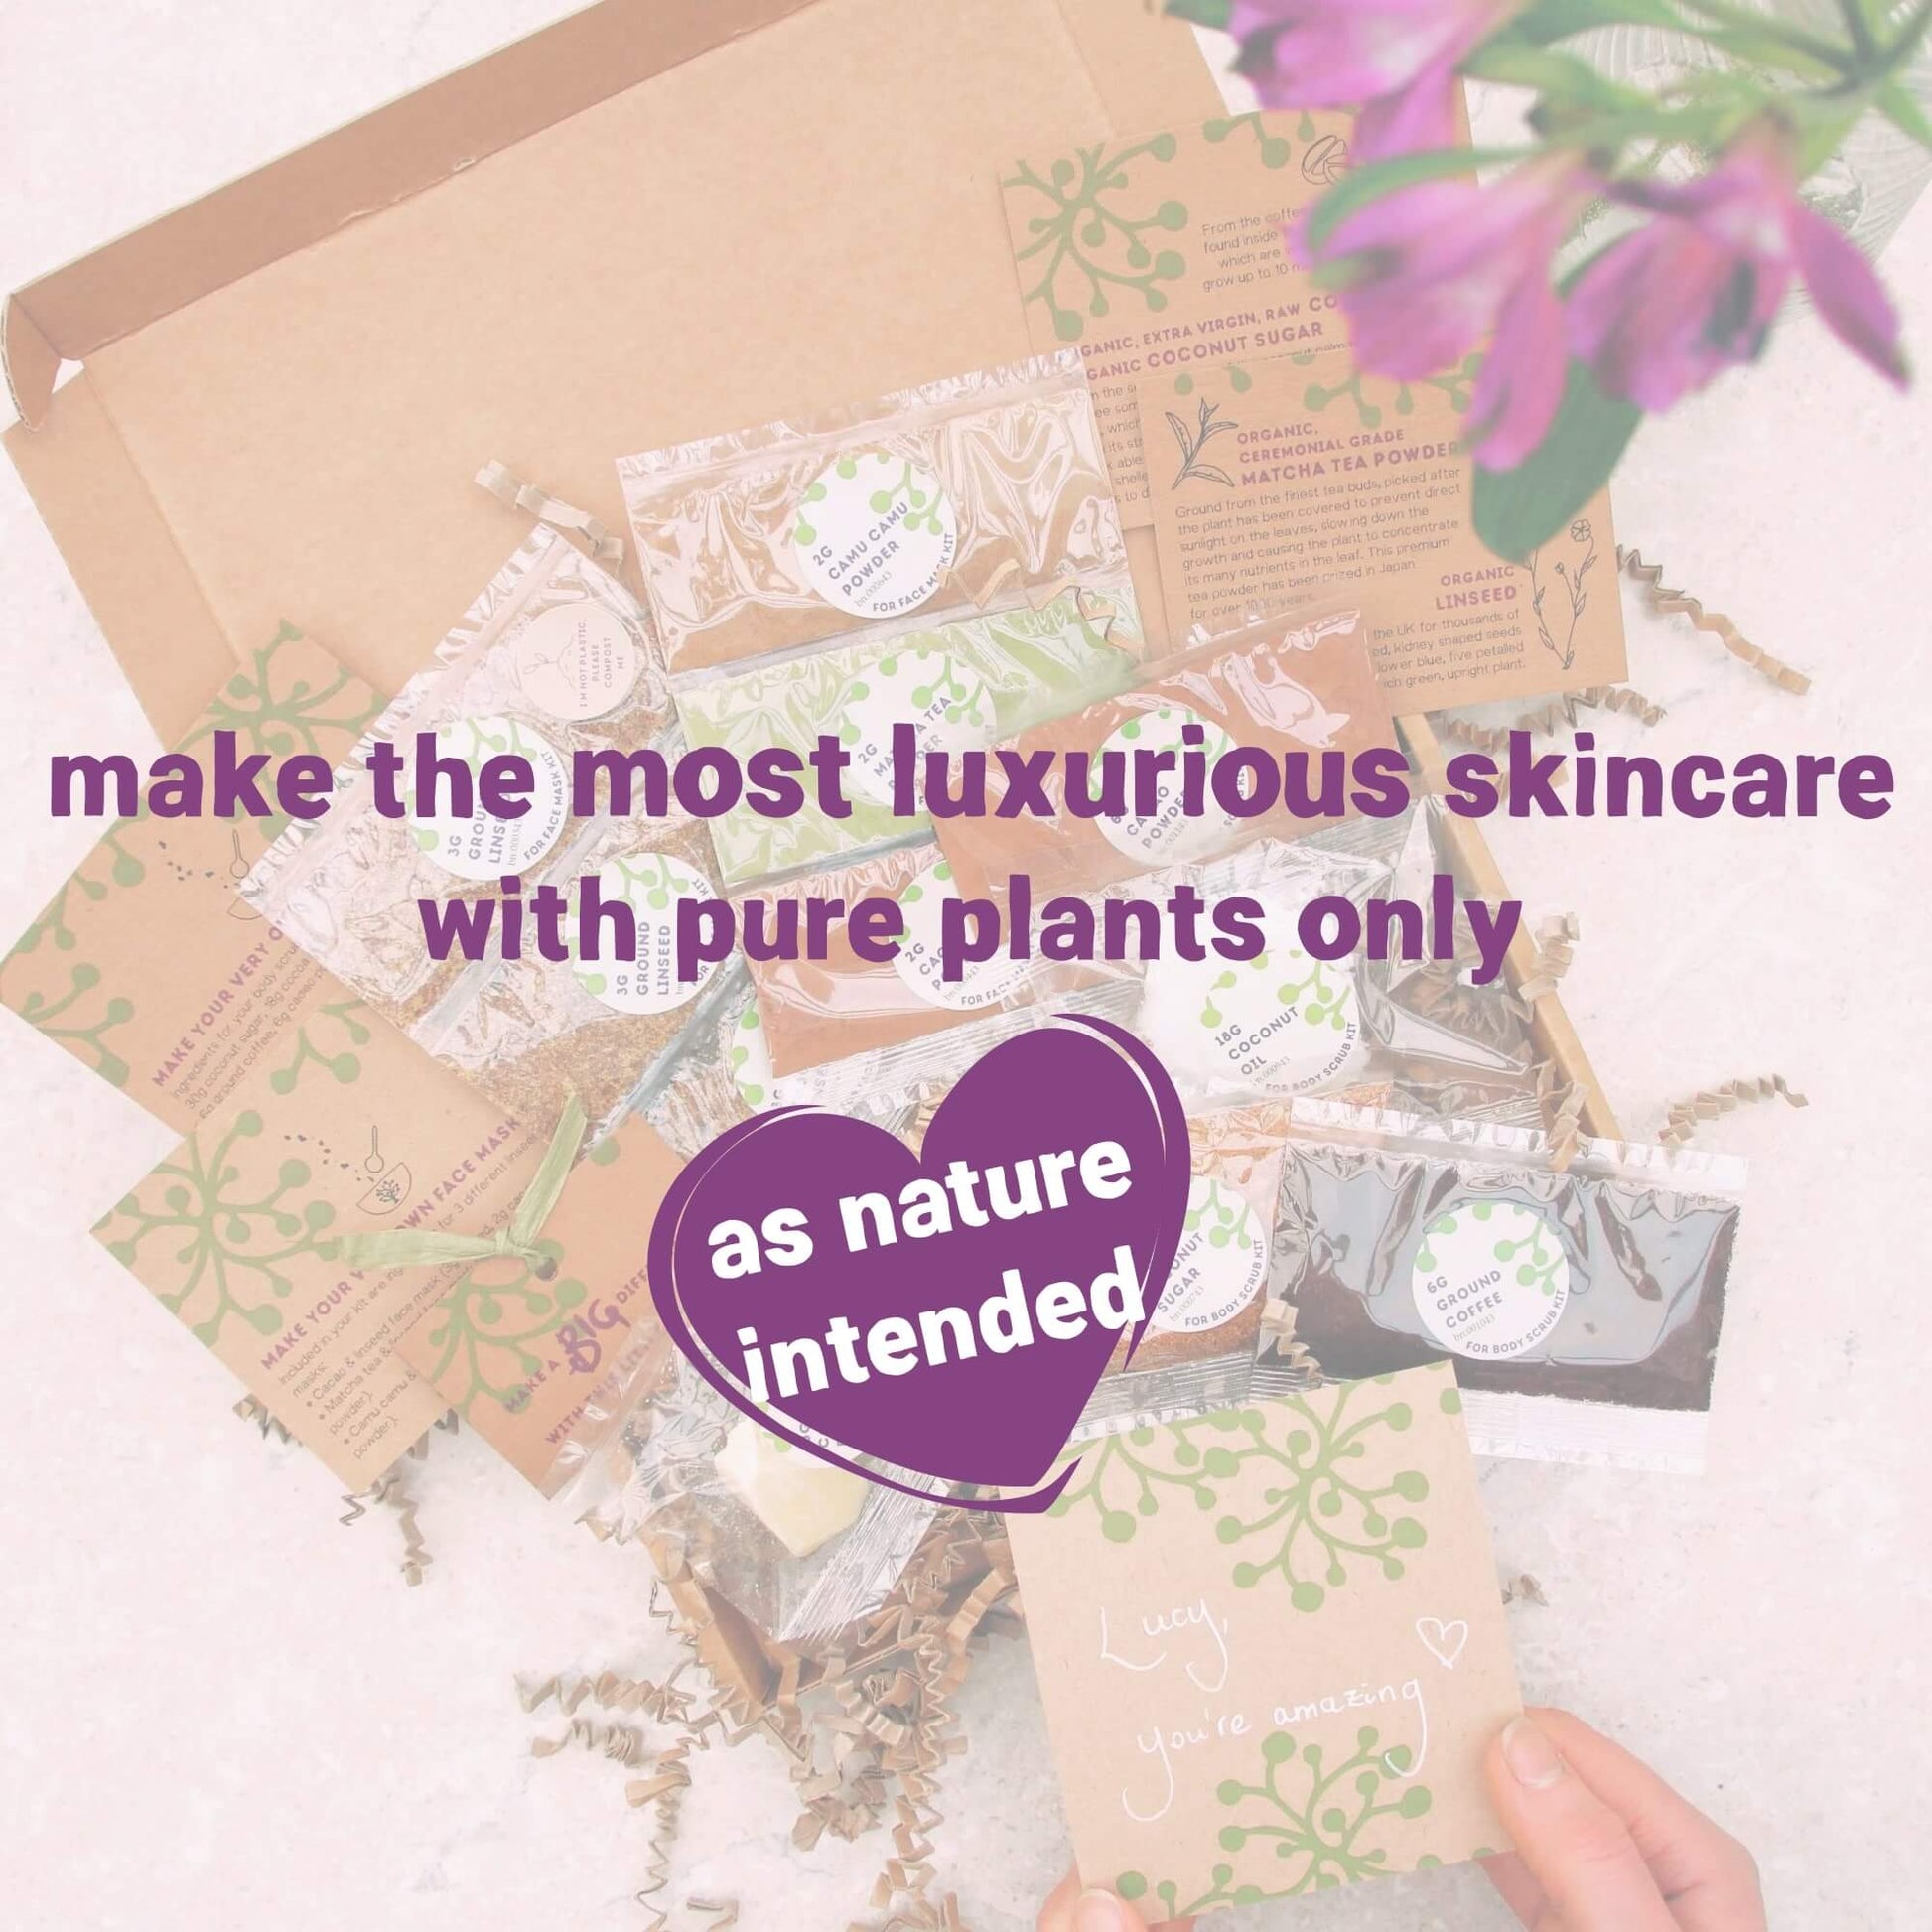 eco-friendly skincare kit inside mother's day letterbox gift box